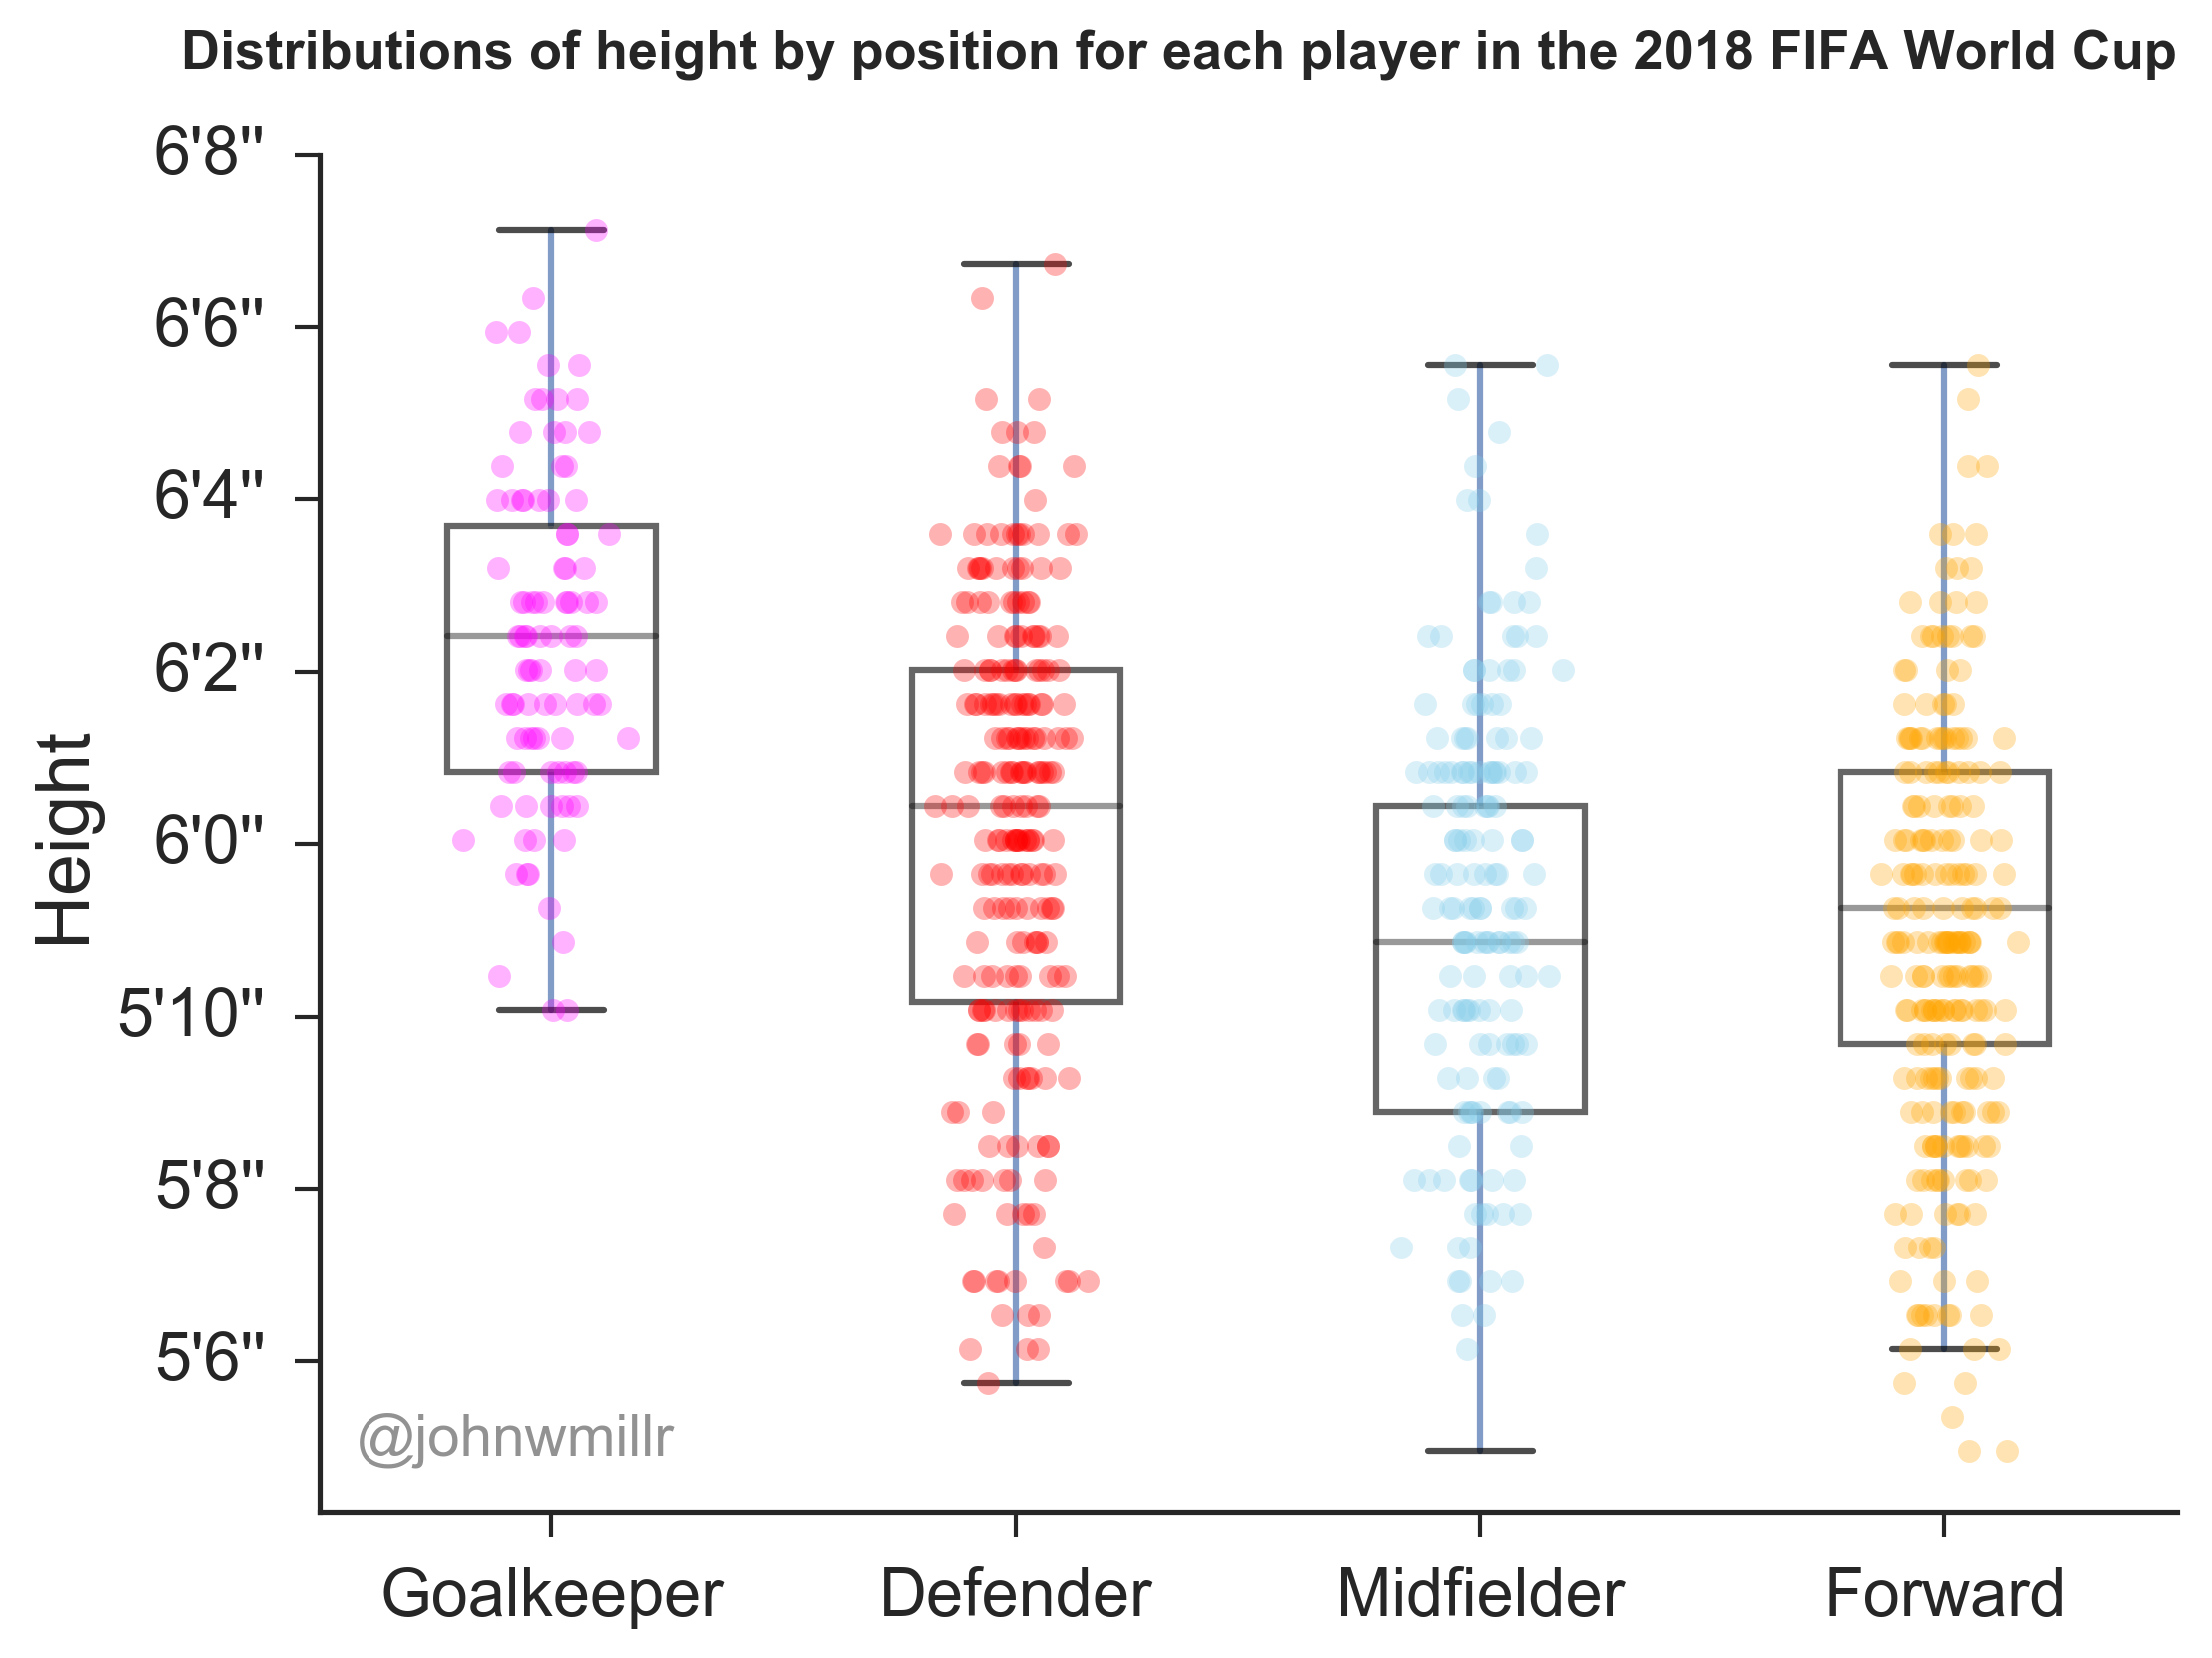 Distributions of height for the different positions in soccer